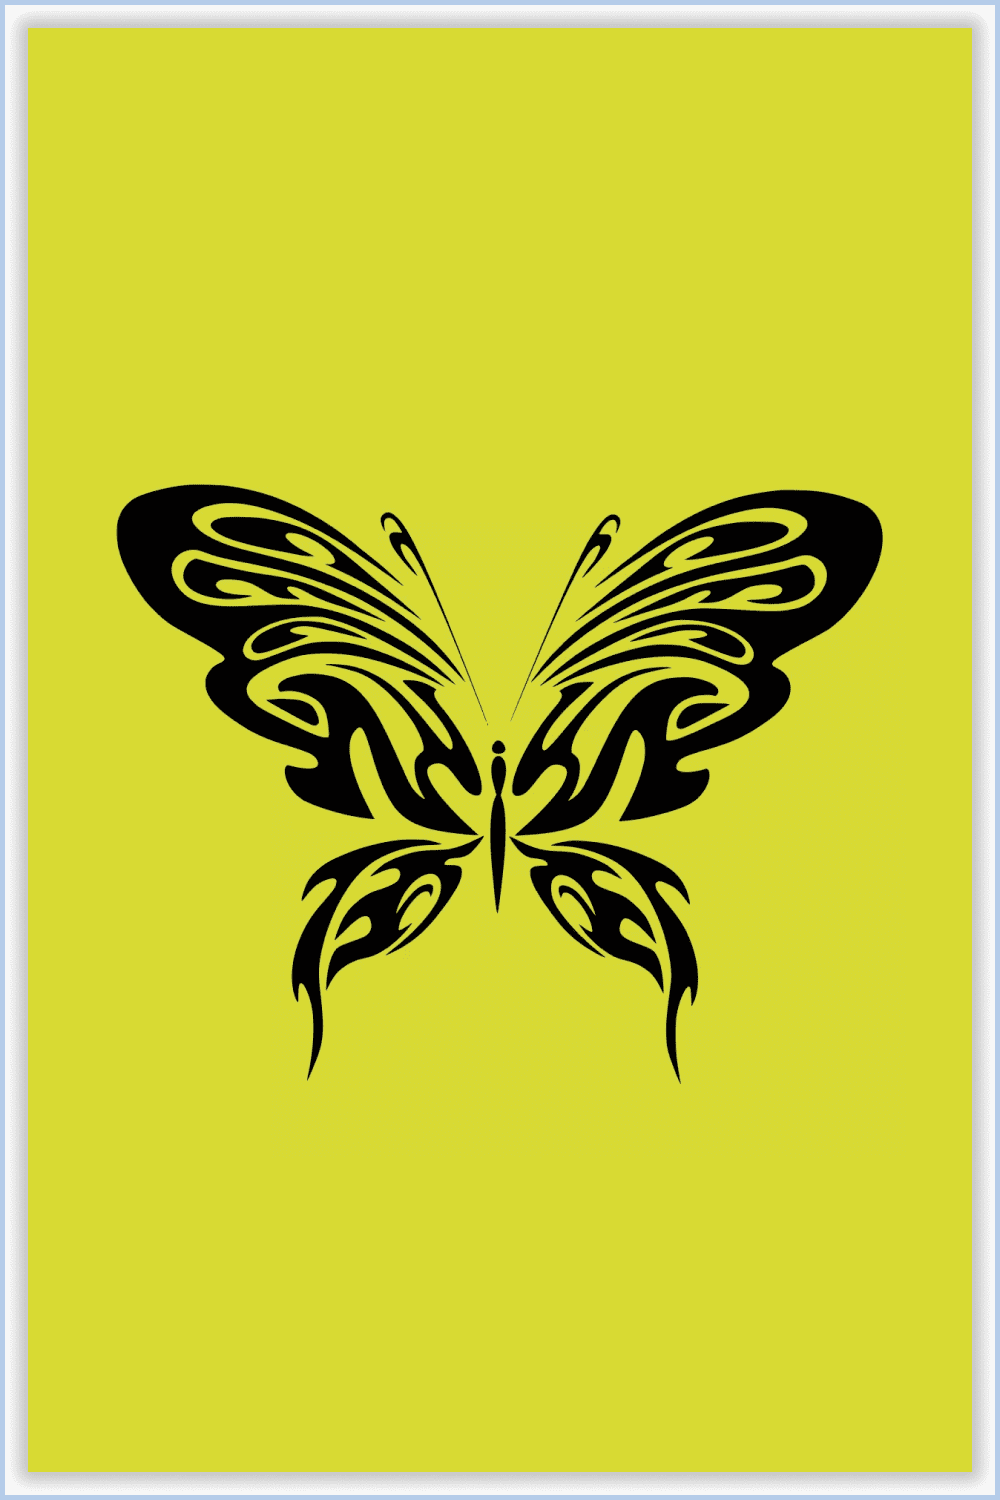 Butterfly in black from above with smooth lines on a yellow background.